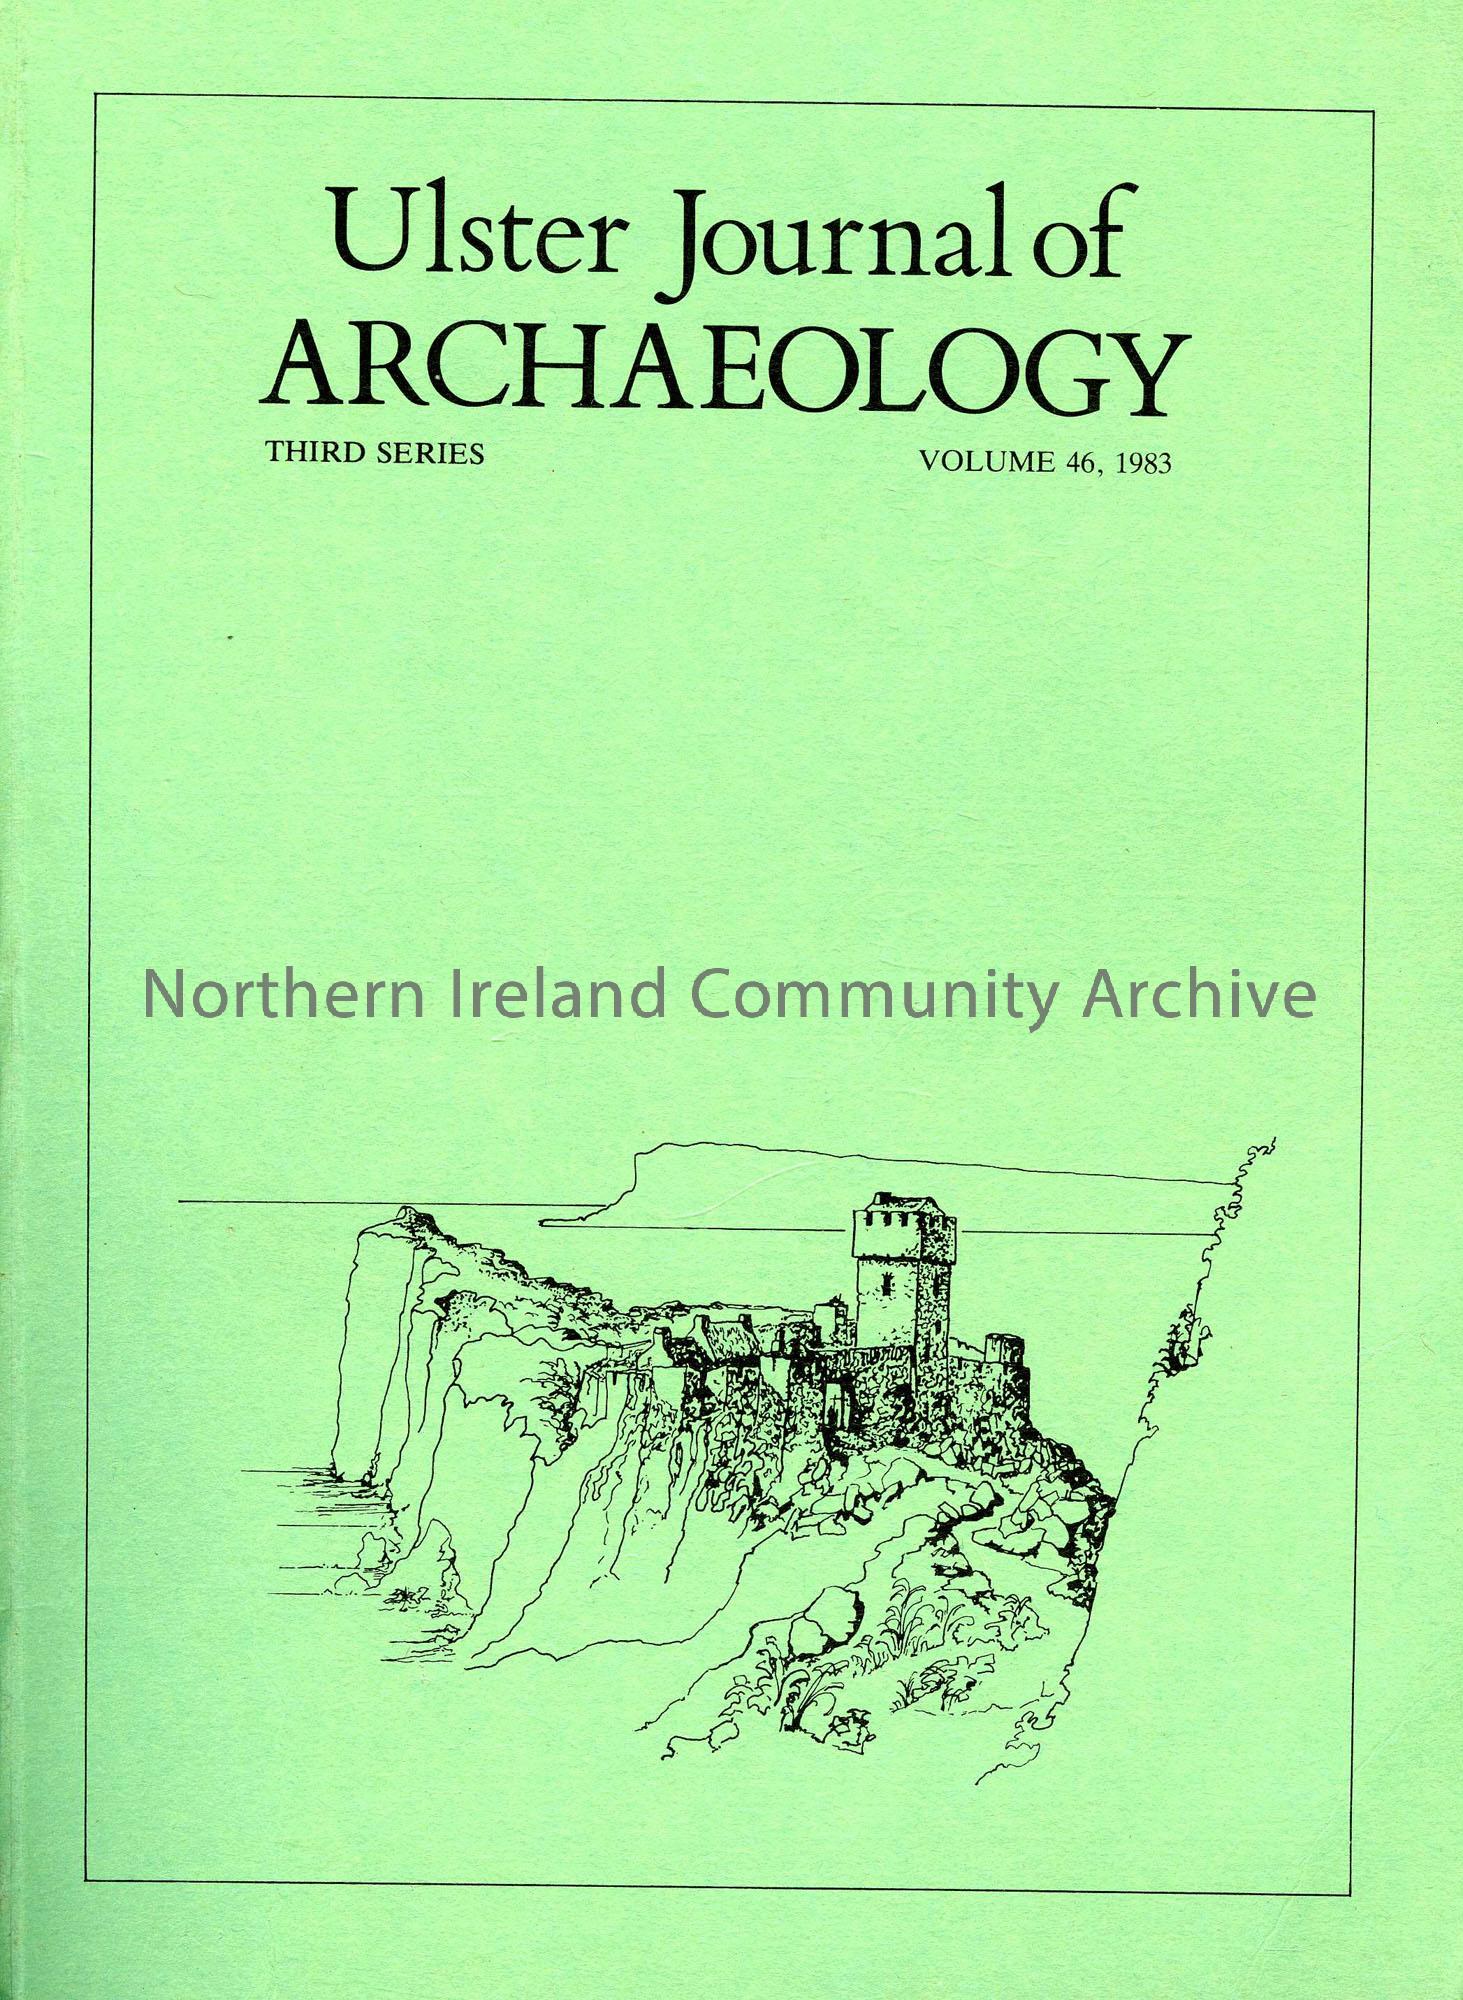 book titled, Ulster Journal of Archaeology. Third Series Volume 46, 1983 (2400)